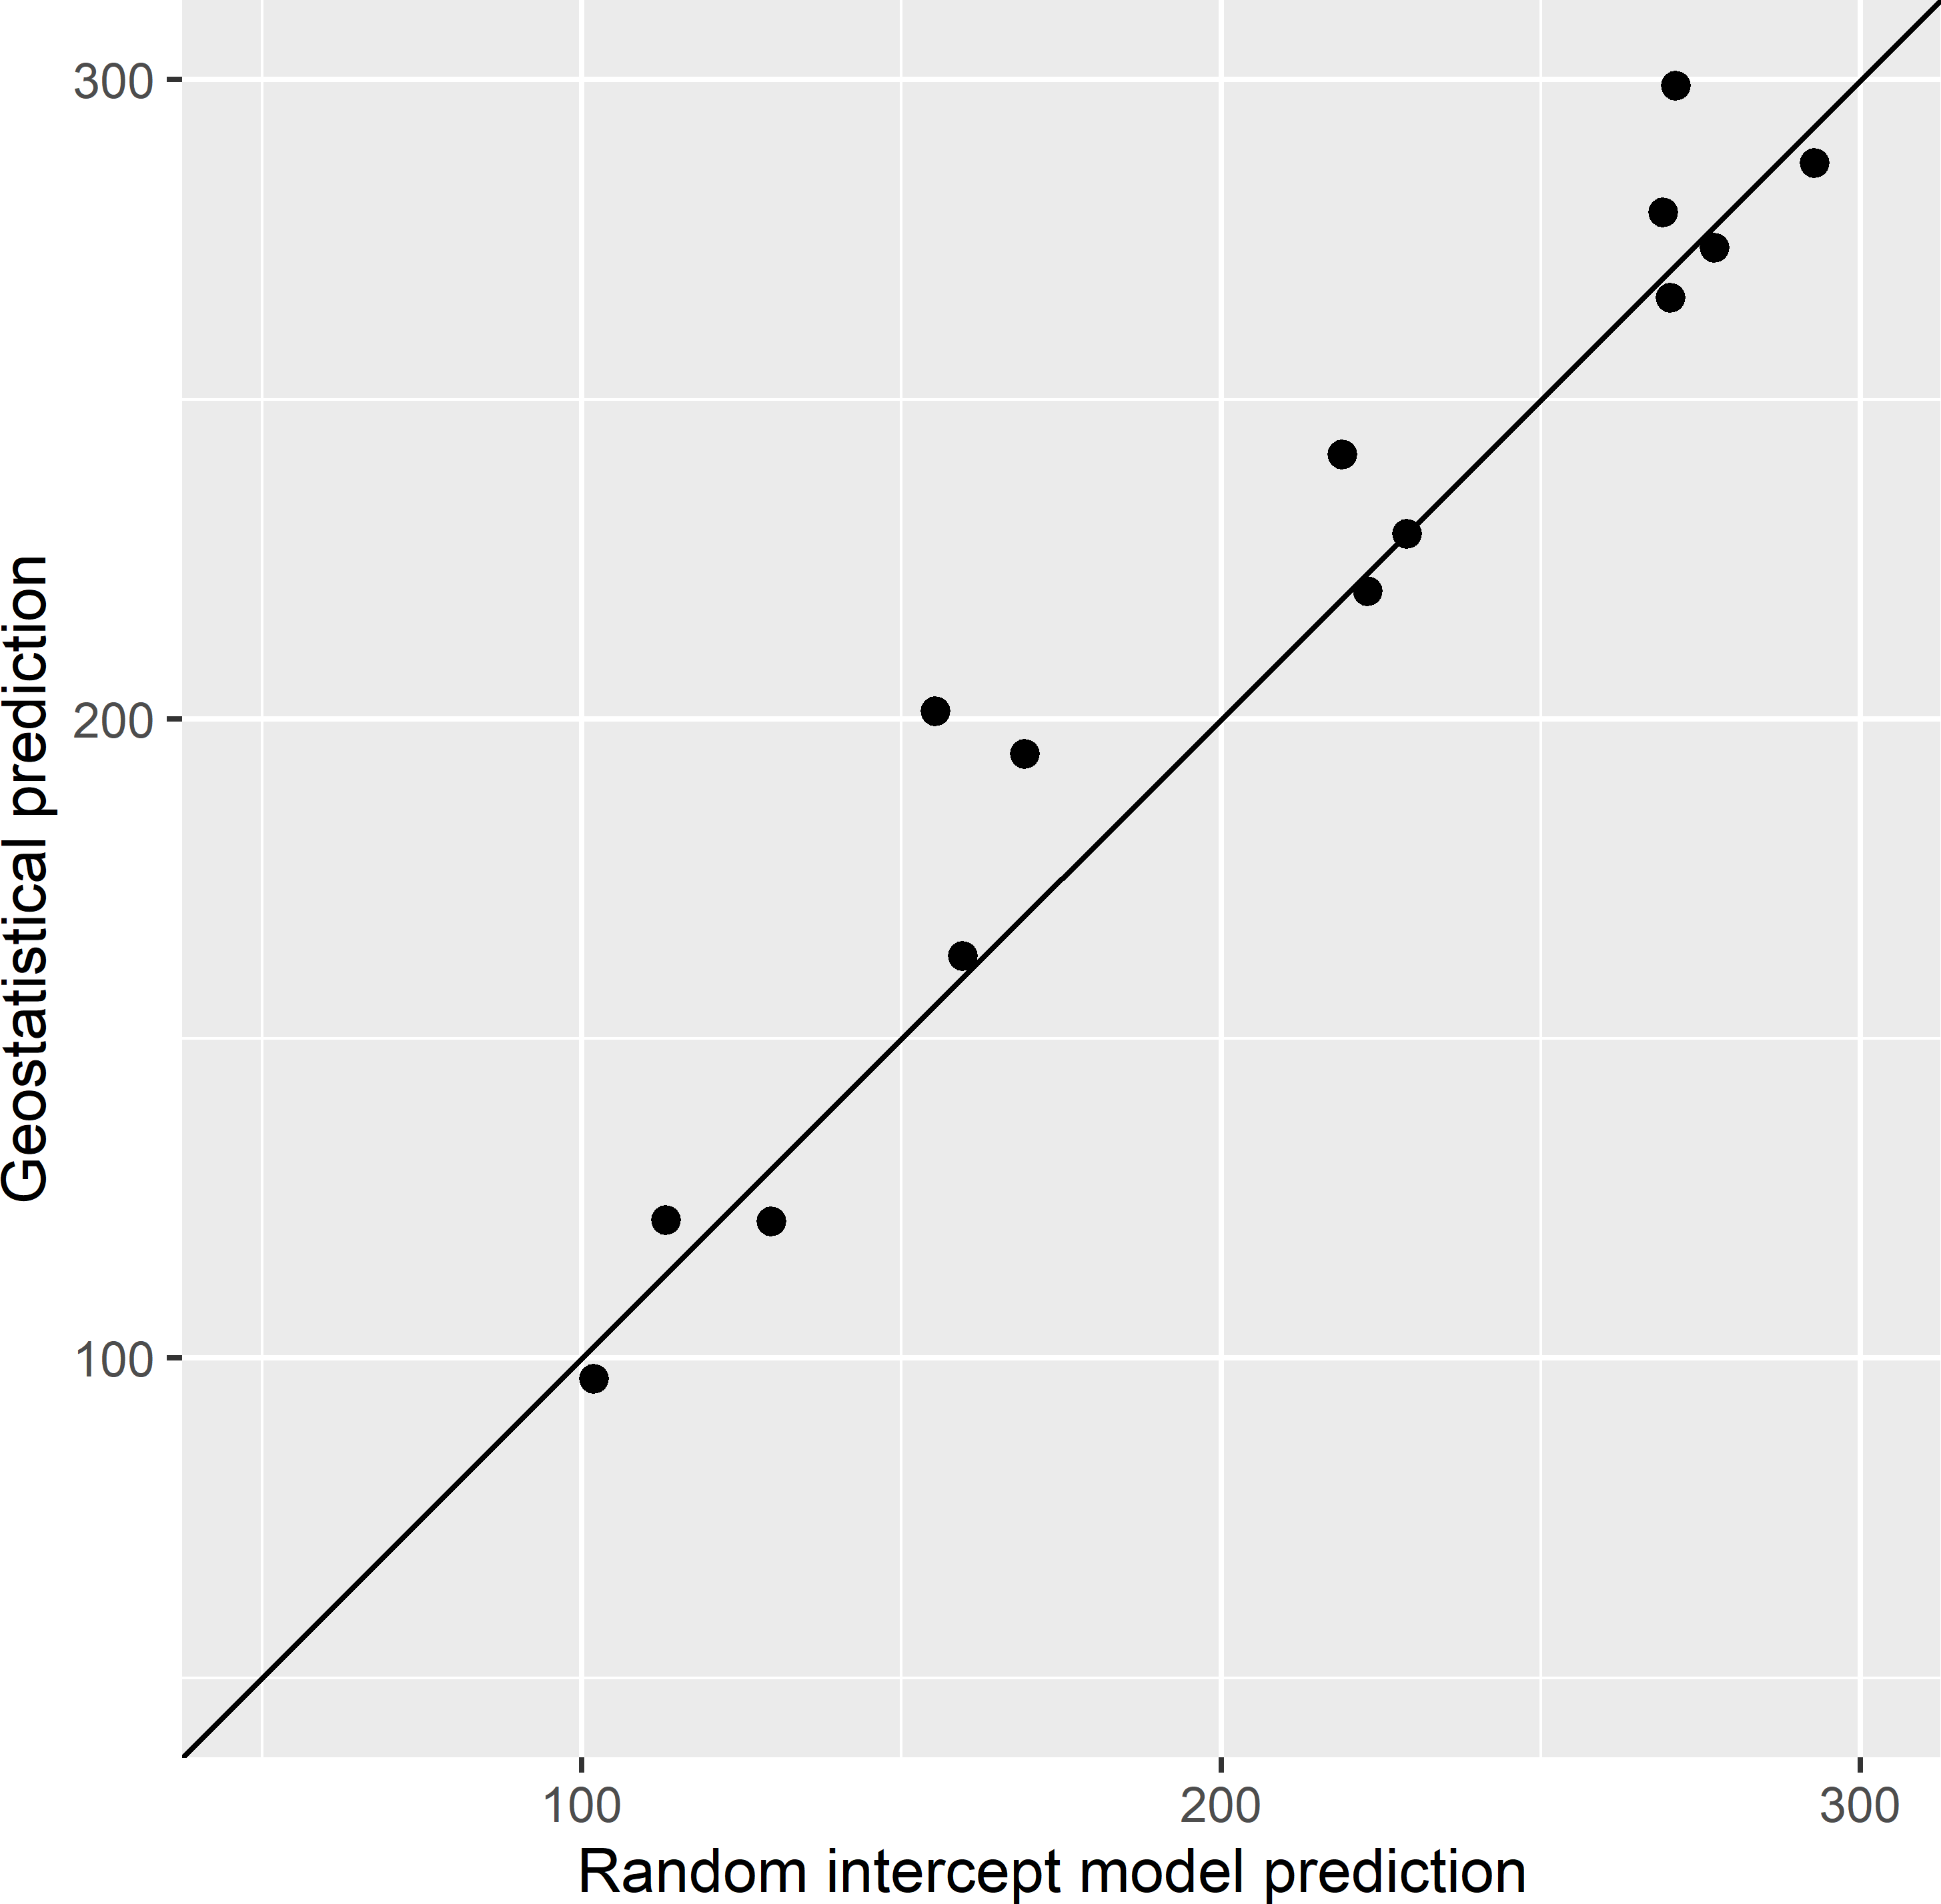 Scatter plot of model-based predictions of the mean AGB (109 kg ha-1) of ecoregions in Eastern Amazonia, obtained with the random intercept model and the geostatistical model. The solid line is the 1:1 line.